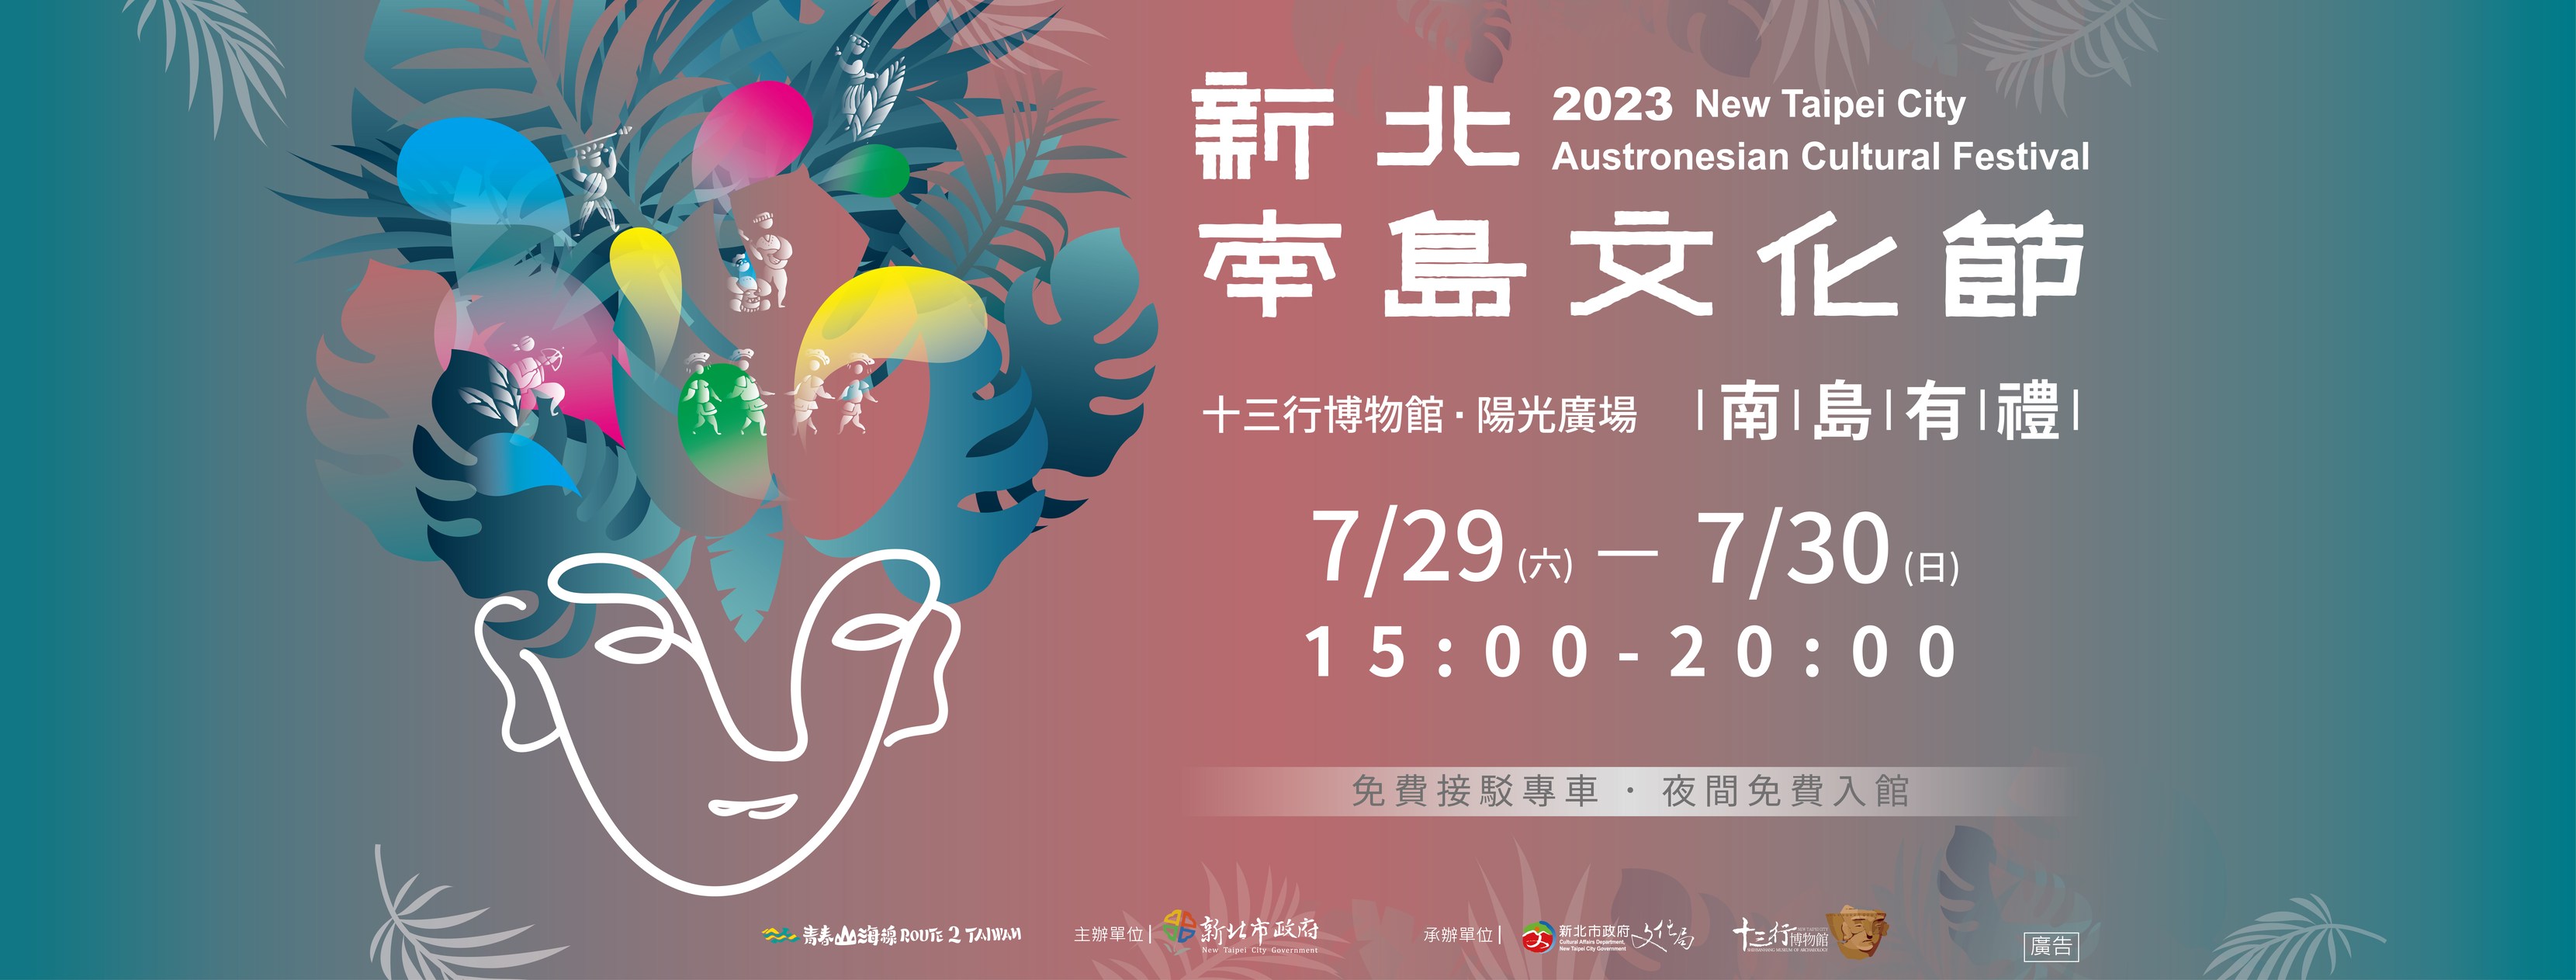 2023 New Taipei City Austronesian Cultural Festival features foreign markets, performances, and multiculturalism of South Island.  Photo provided by New Taipei City Shihsanhang Museum of Archaeology